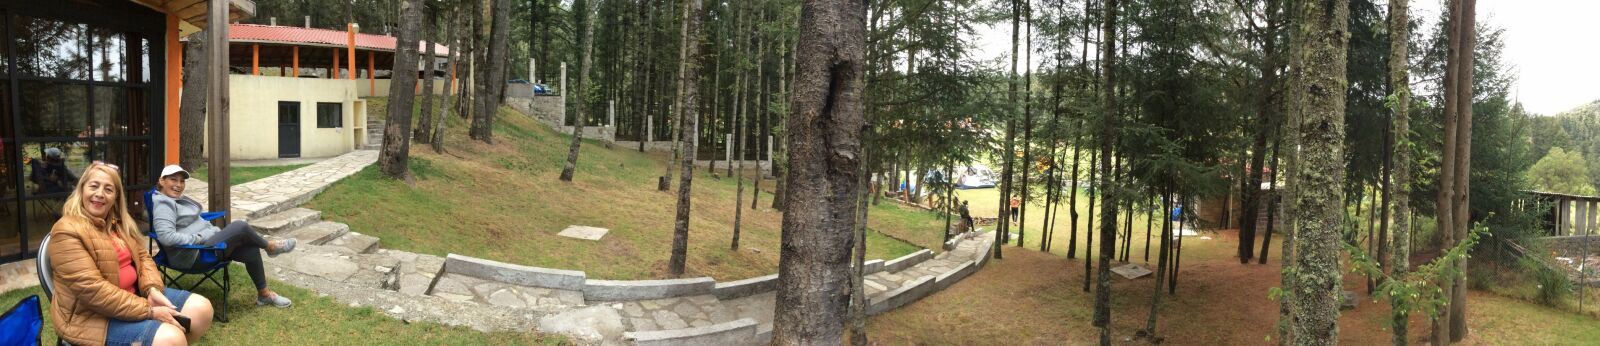 Apple iPad Air sample photo. Pano, forest, tree photography